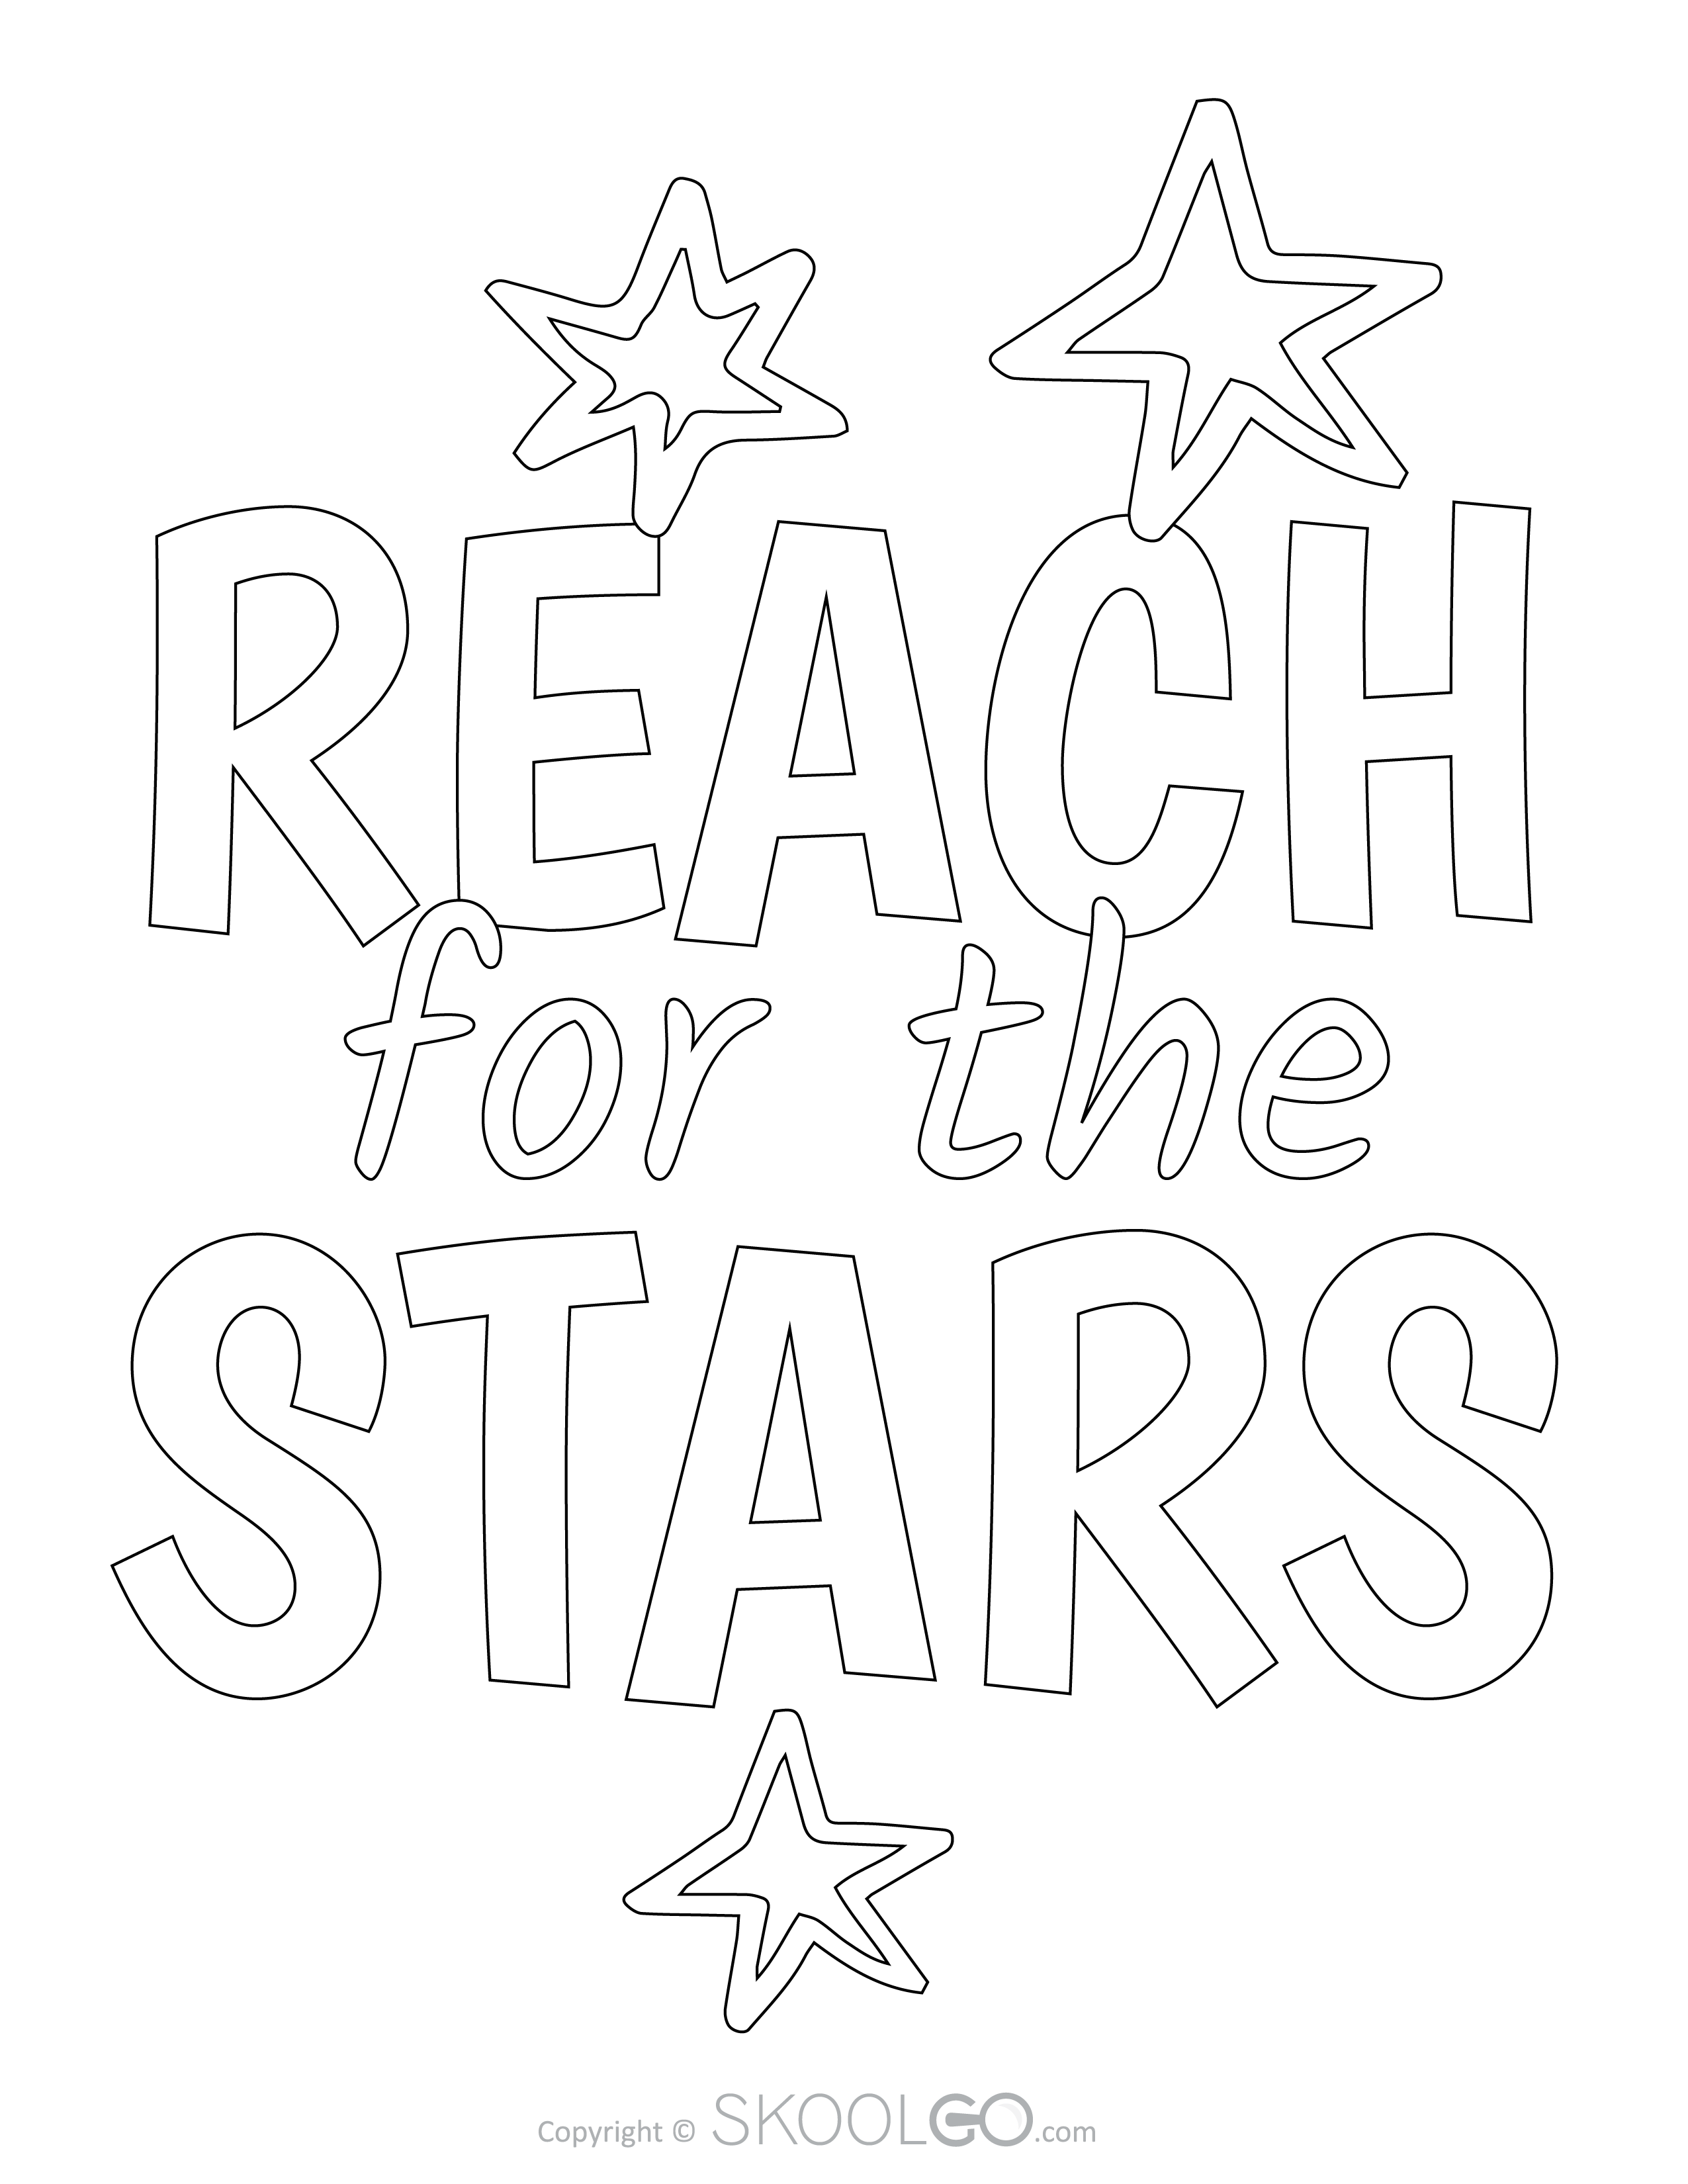 Reach For The Stars - Free Classroom Poster Coloring Version